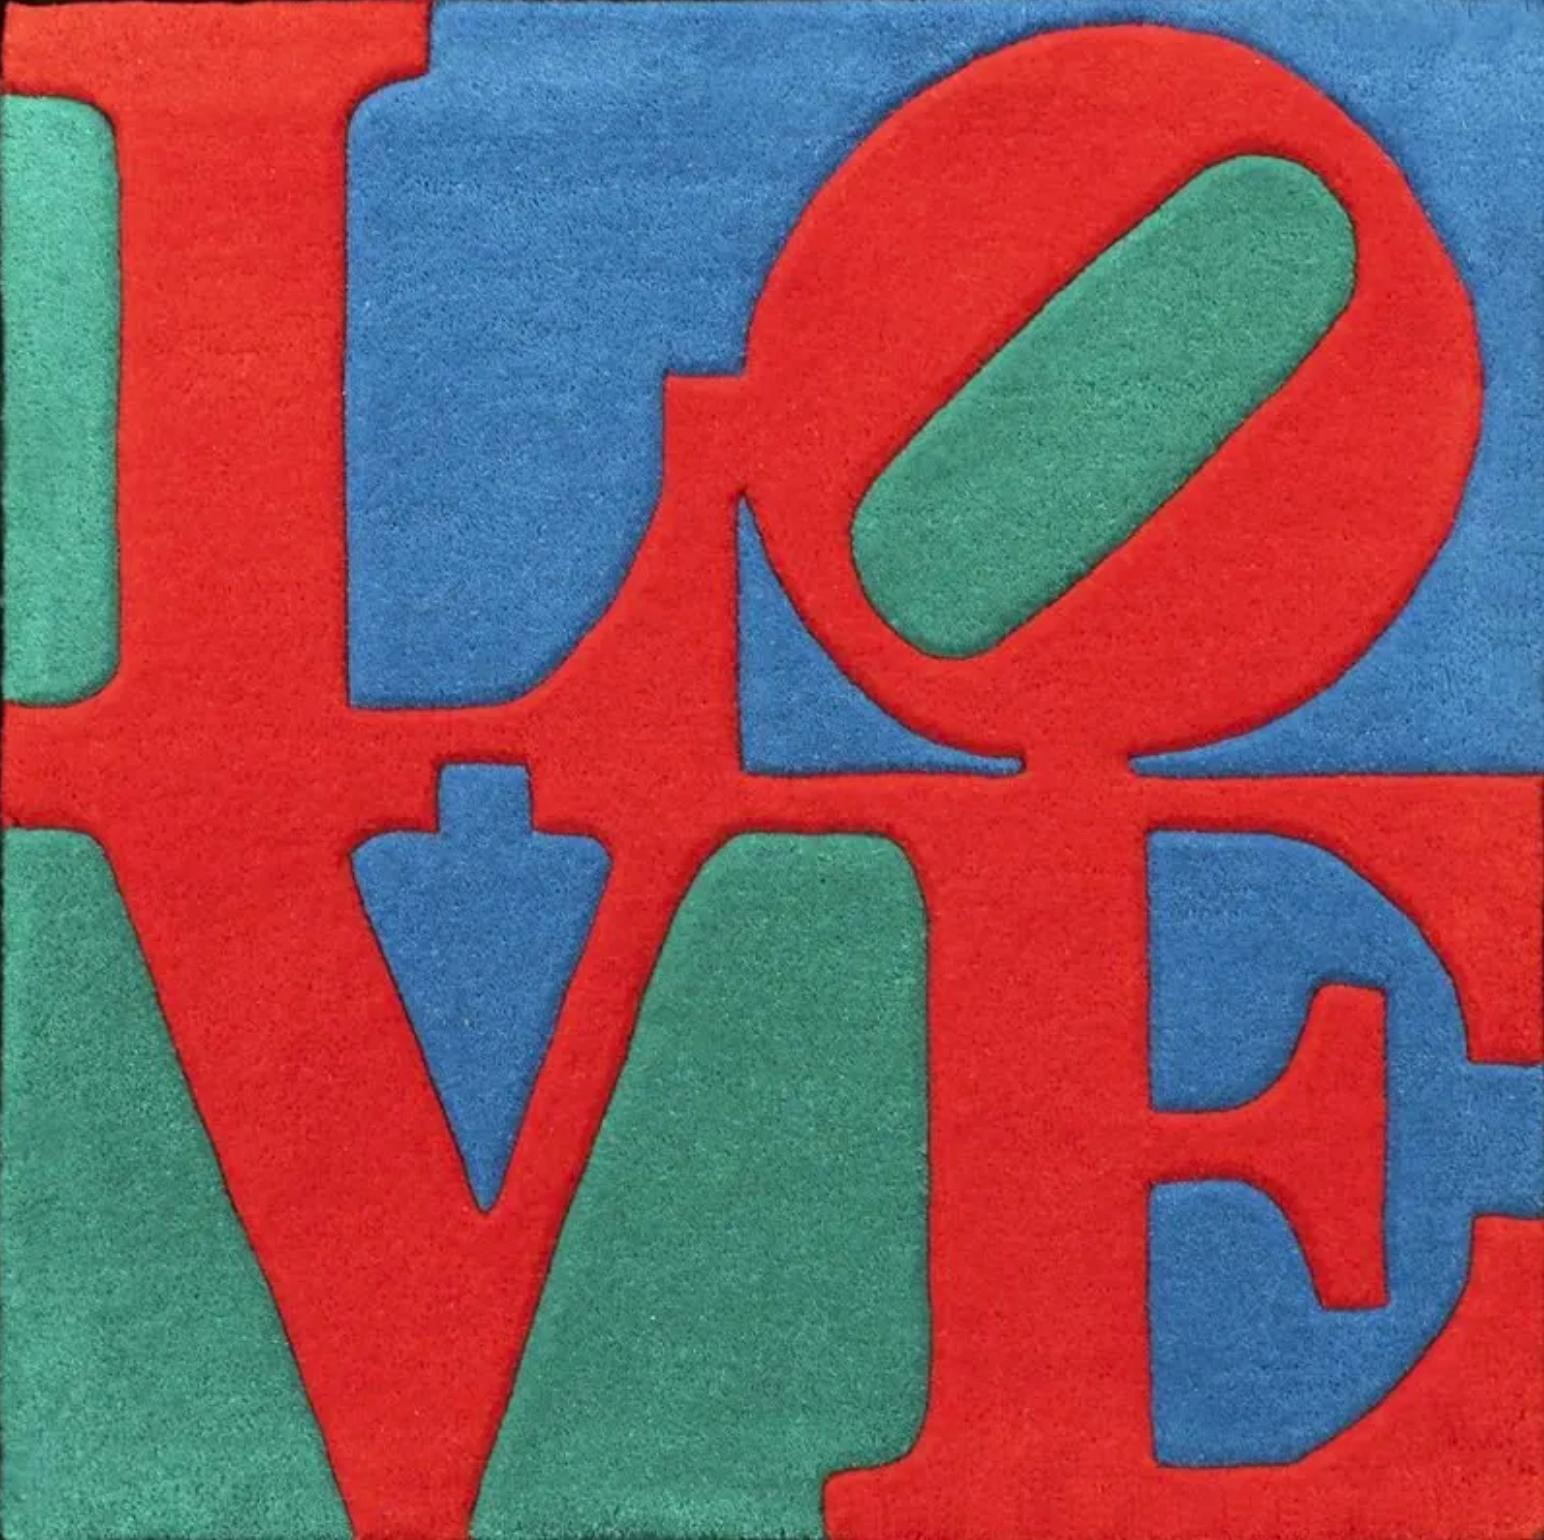 Classic Love - Print by Robert Indiana